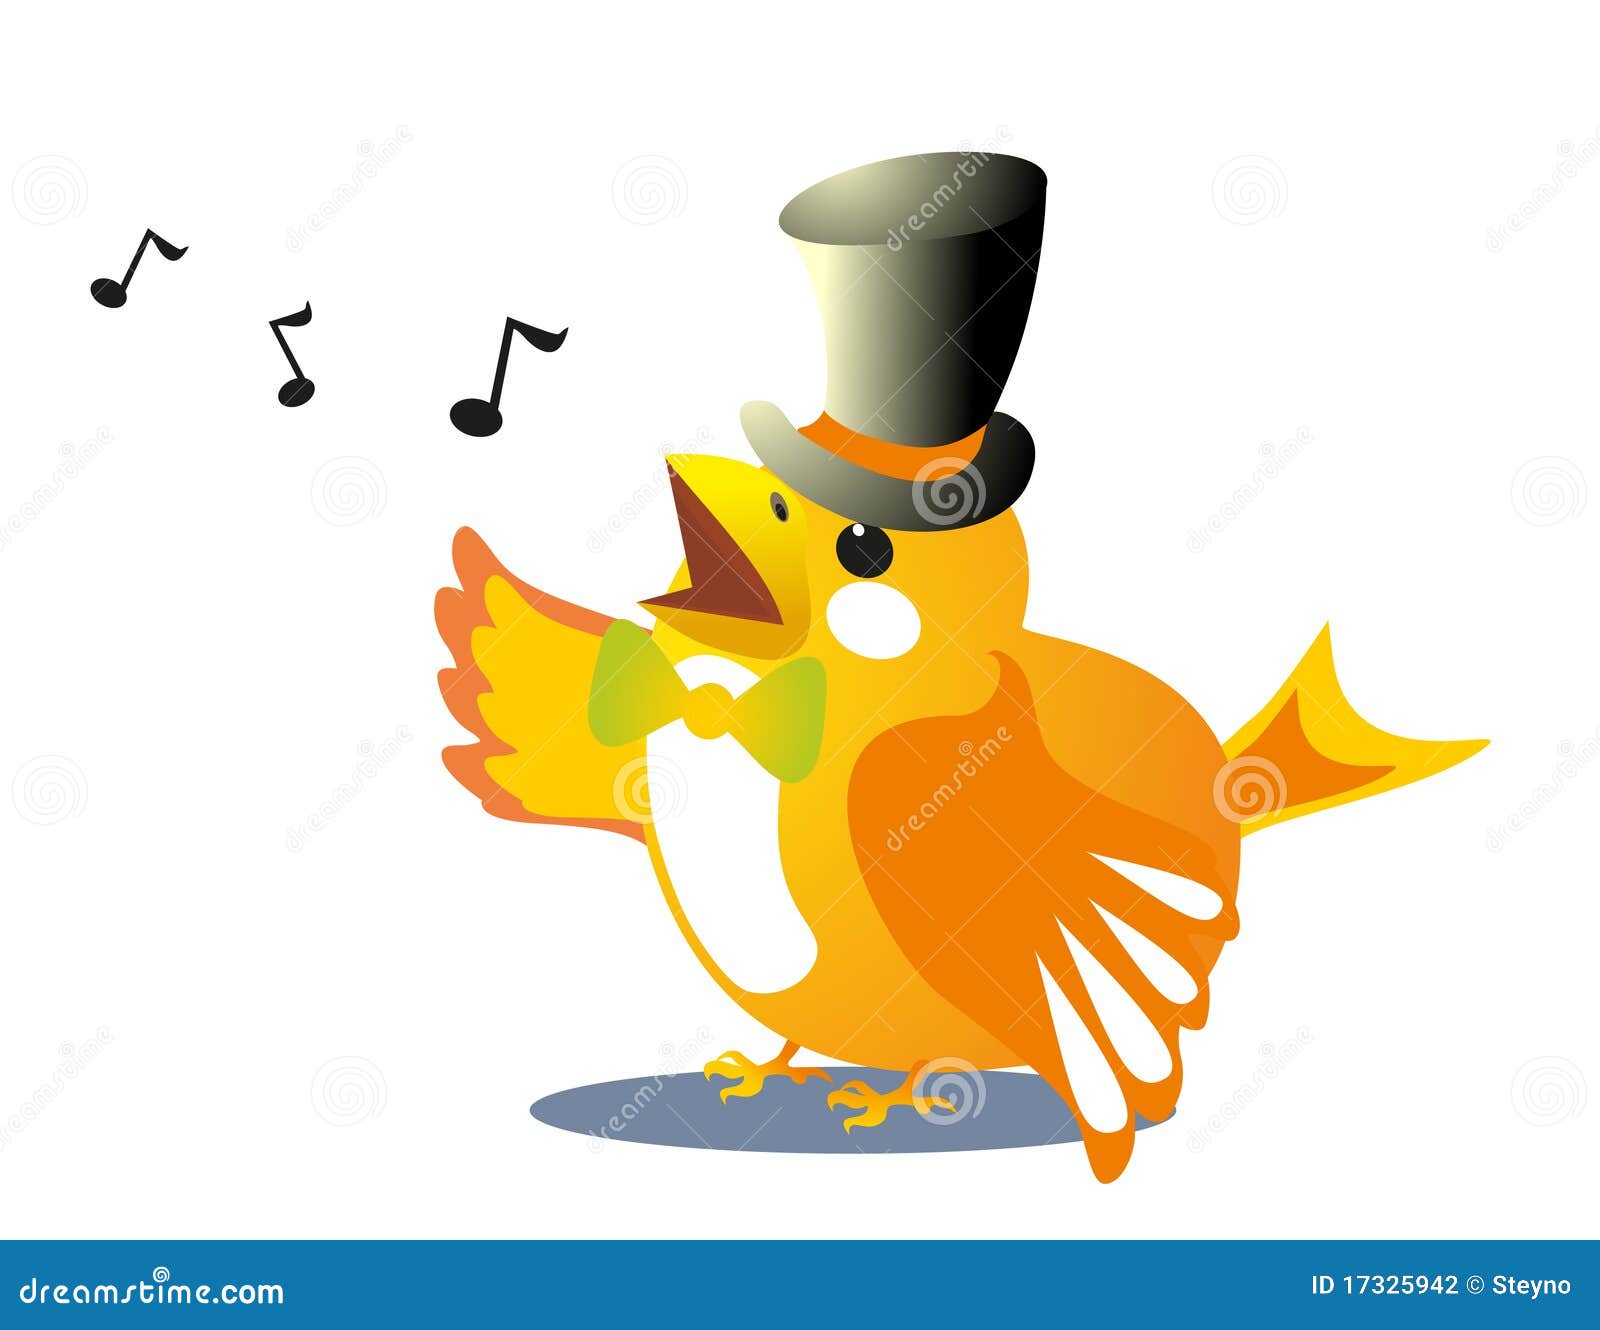 Sparrow song stock vector. Illustration of tail, friendship - 17325942